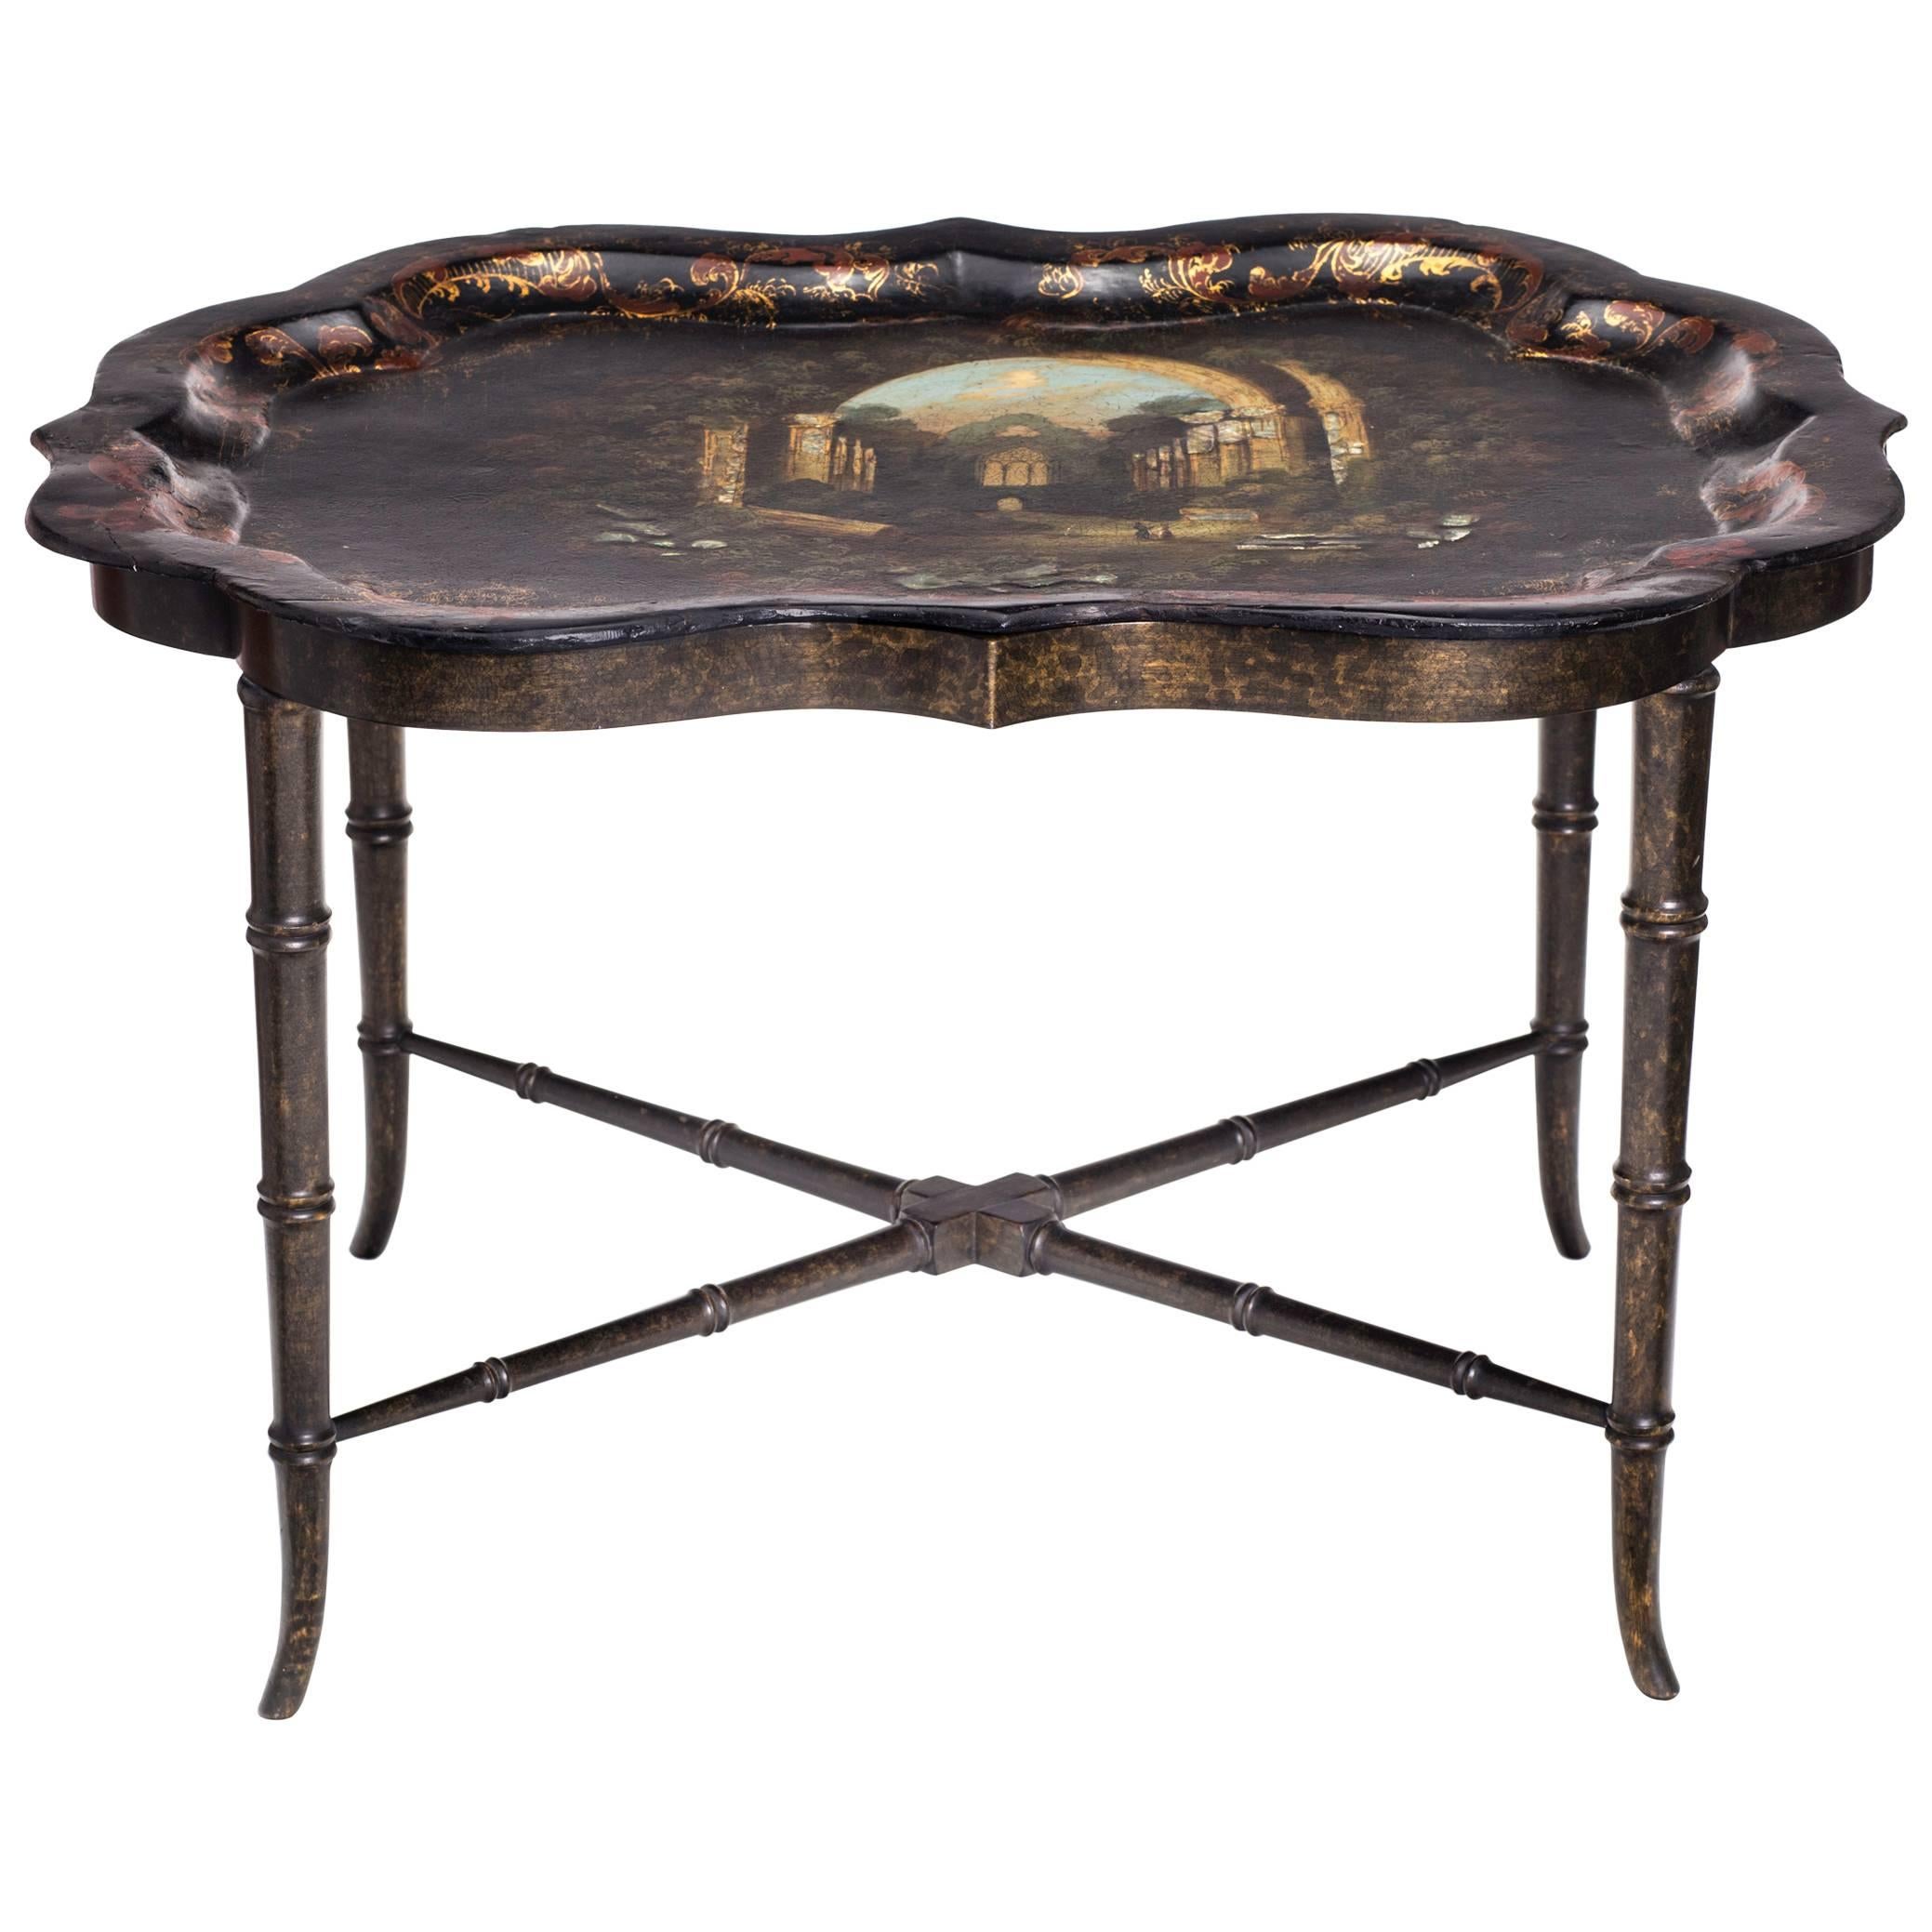 19th century Victorian tray table with exquisite mother-of-pearl inlay work.
Scalloped edge tray, separates from the base. Wood base is probably newer, but follows the shape and is beautifully hand made. There are few historical repairs on the